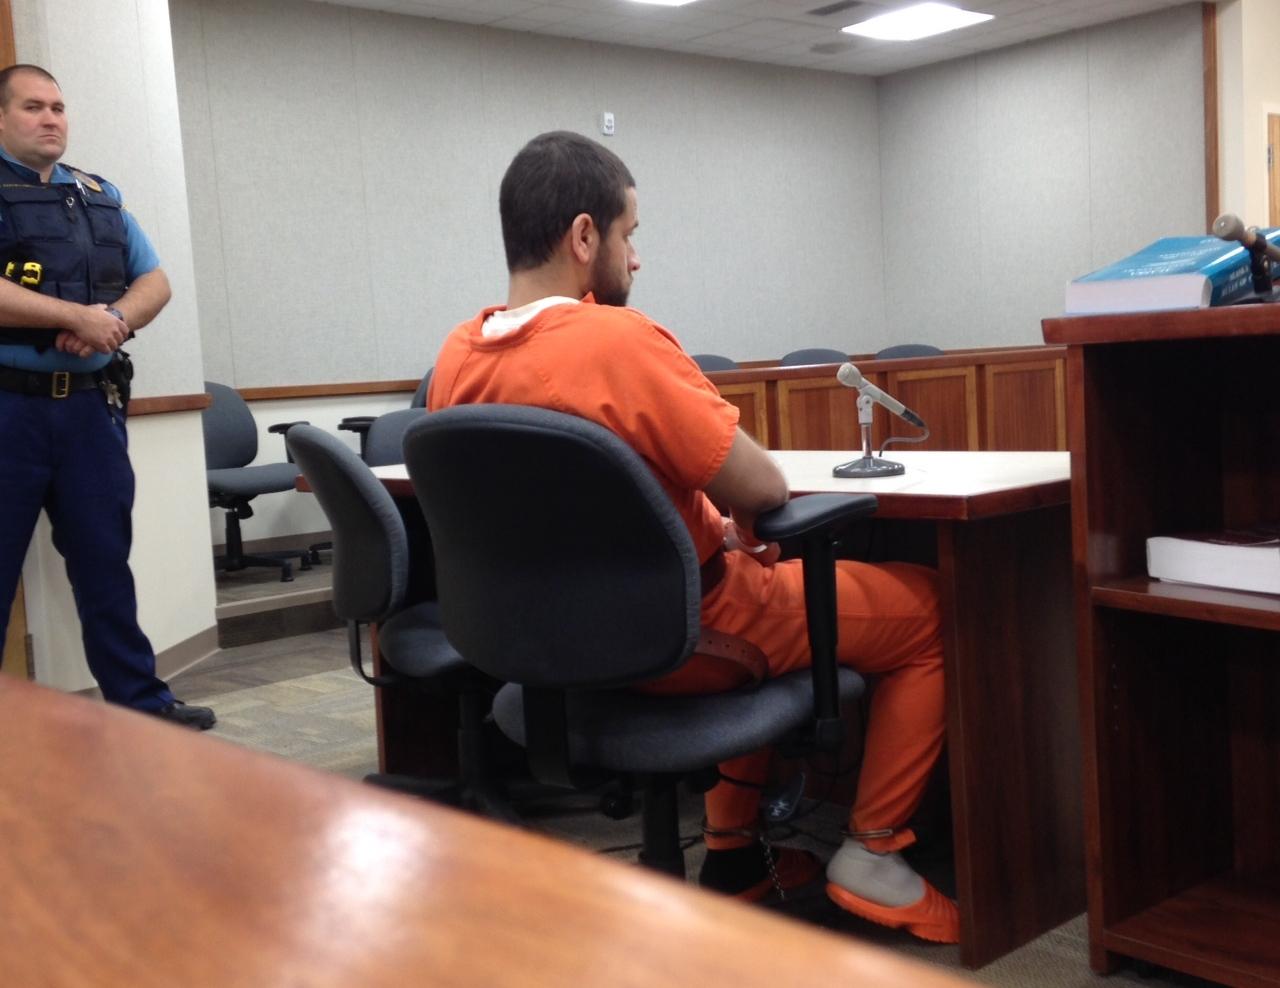 Christian Young, 24, was arraigned for felony probation violations Wednesday in Dillingham. (Photo by KDLG)